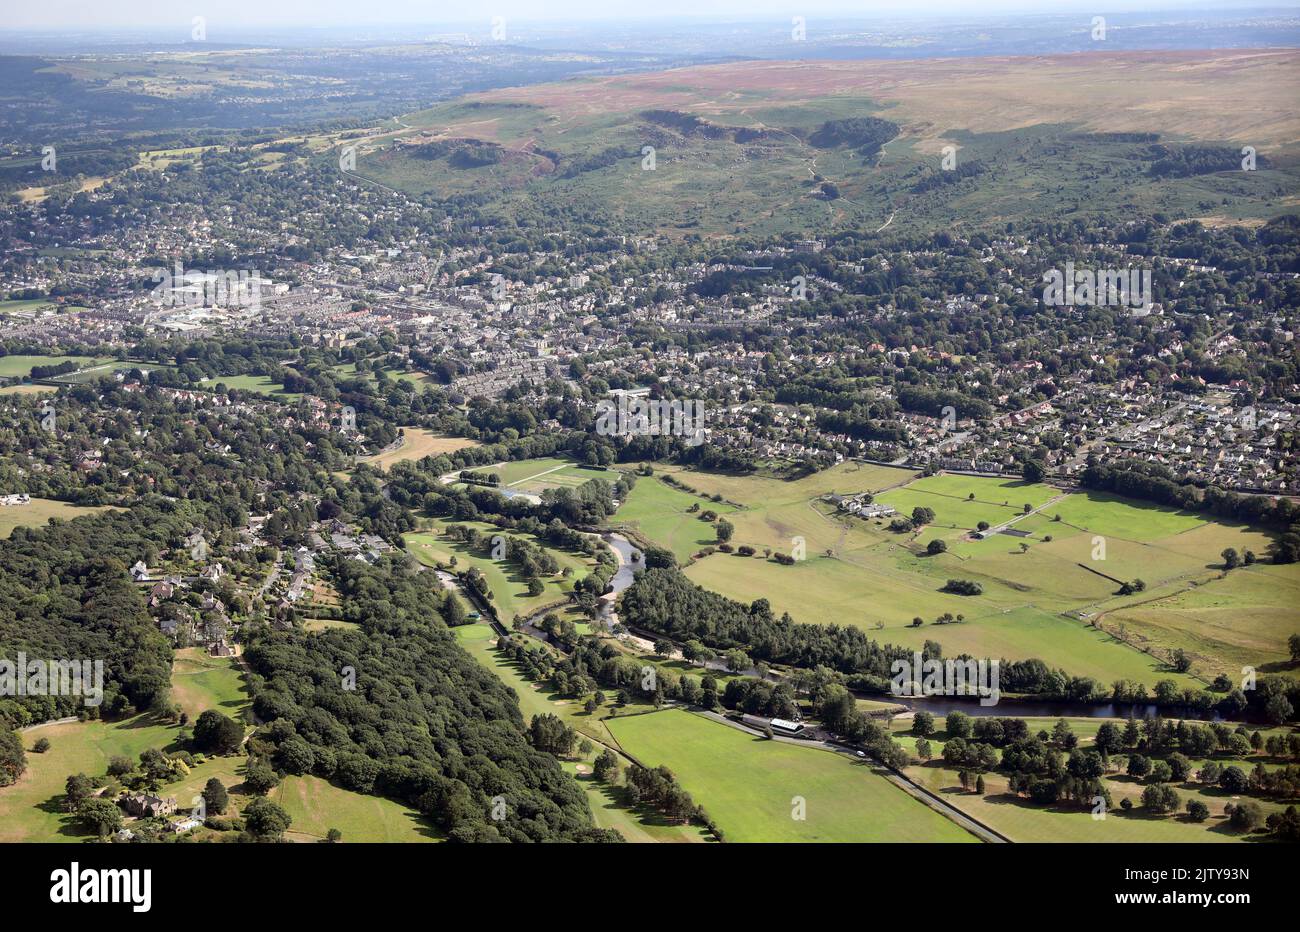 aerial view of the Yorkshire town of Ilkley, with the River Wharfe in the foreground, town centre then Ilkley Moor in the backgorund Stock Photo